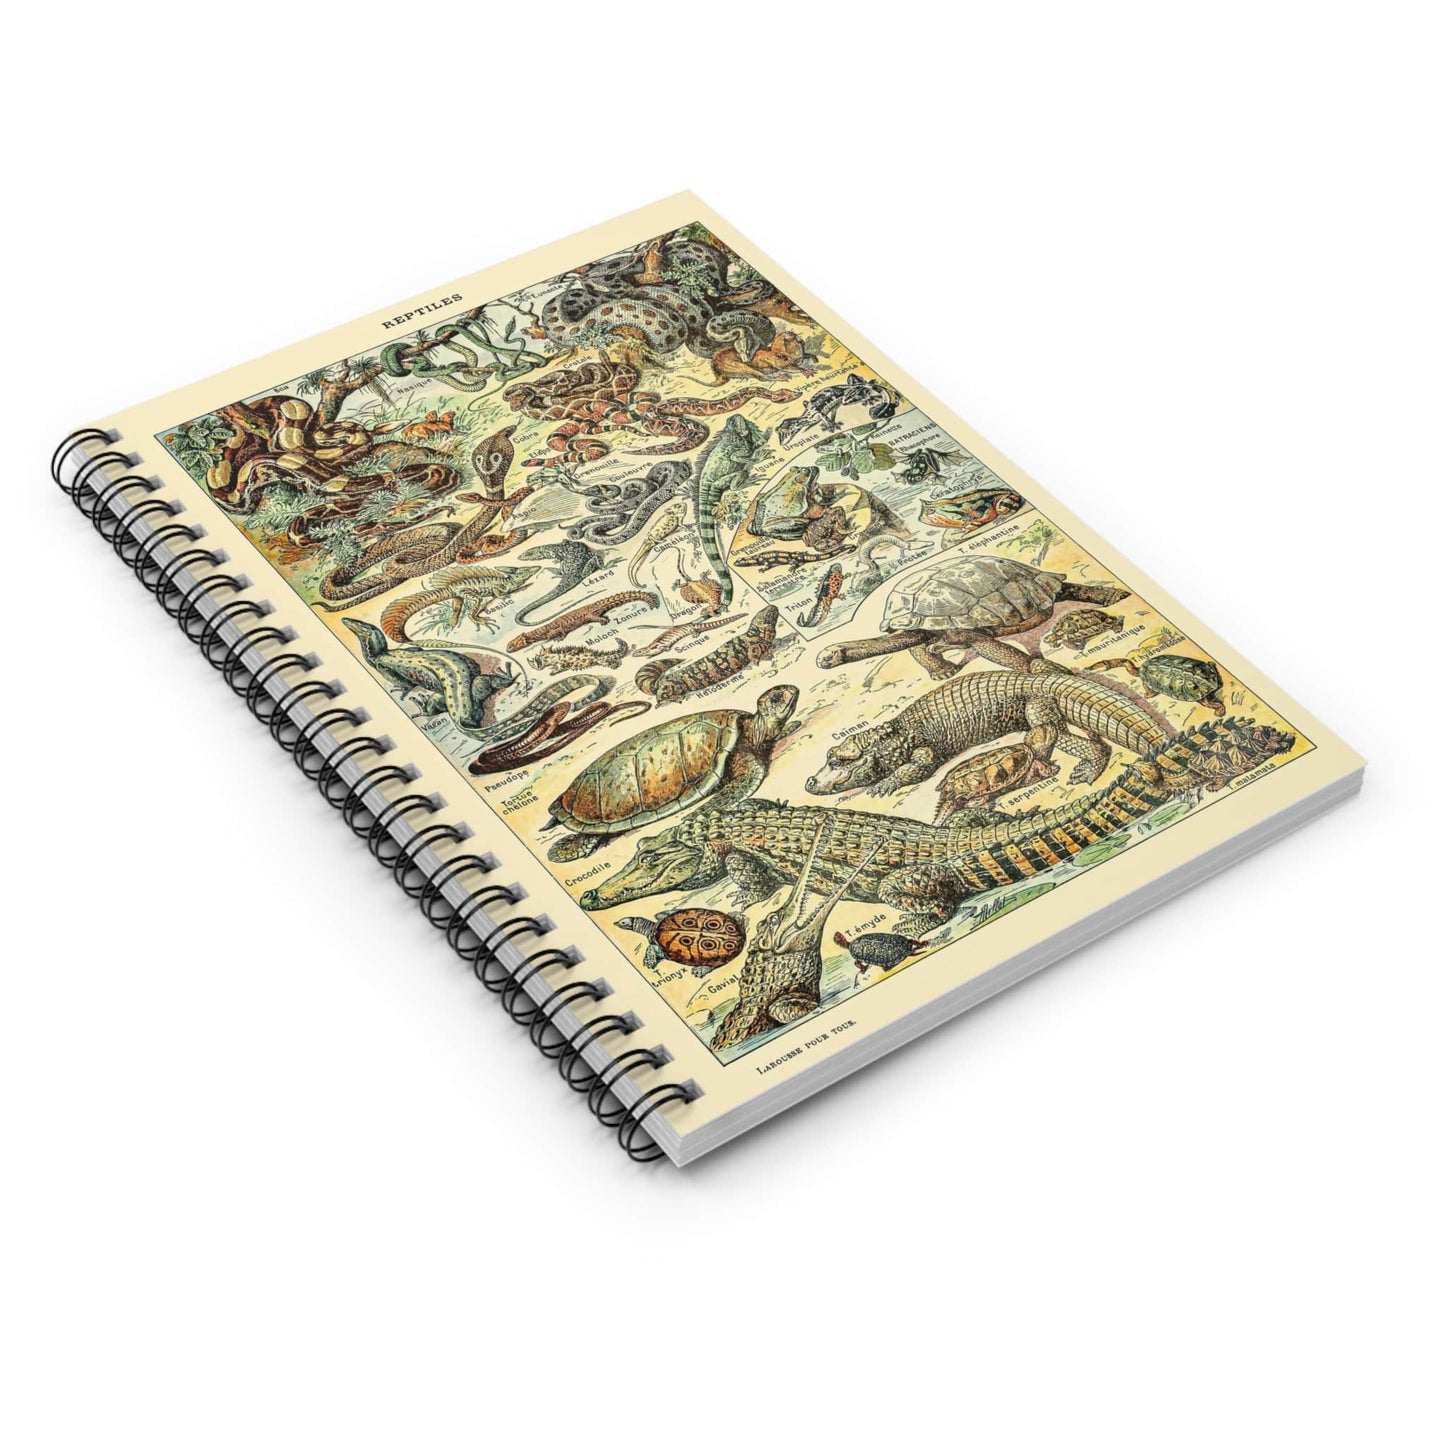 Exotic Animals Spiral Notebook Laying Flat on White Surface